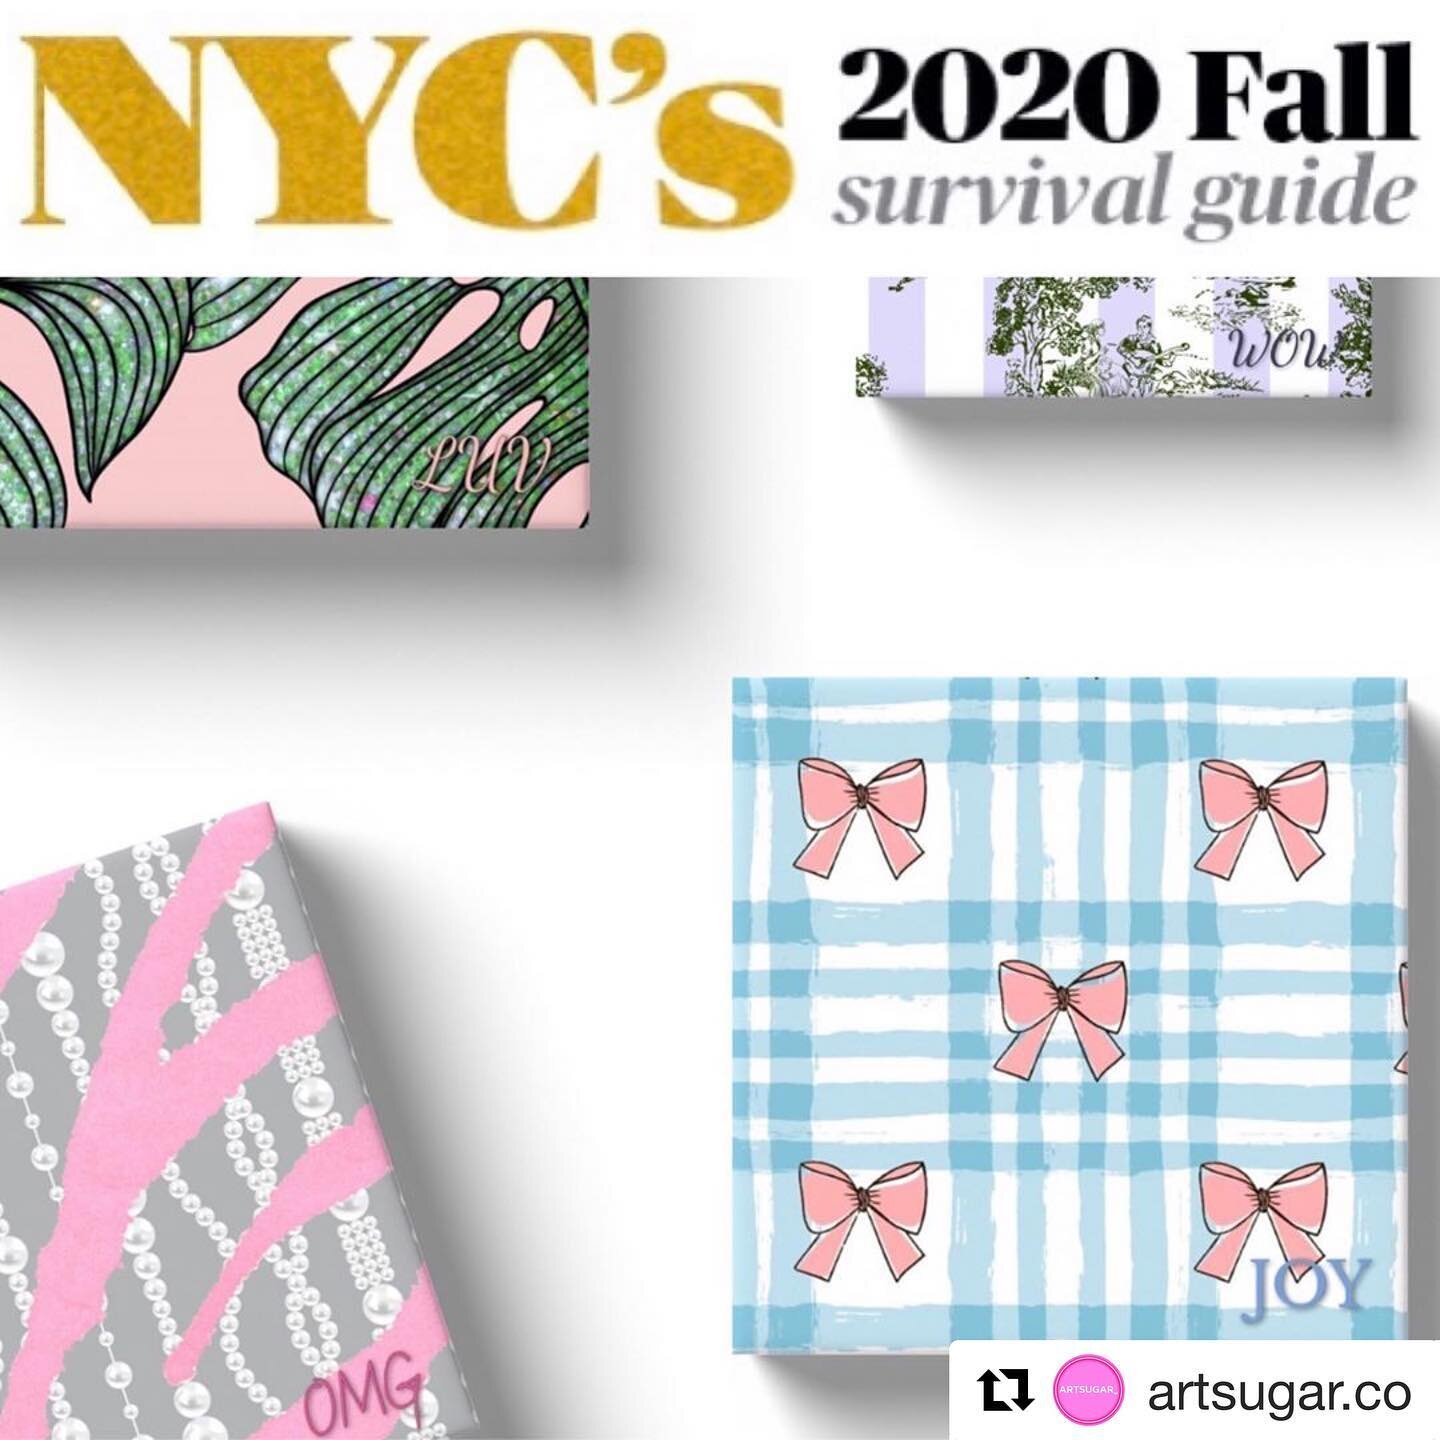 NY Mag says The Hamptons Collection is what you need to survive the fall 🍂 @nymag / @artsugar.co 
🍁
Monogram Your Art Hamptons Style  ArtSugar x Amanda Lauren
🌾
Welcome to The Hamptons! This textile-on-canvas series captures the style and spirit o